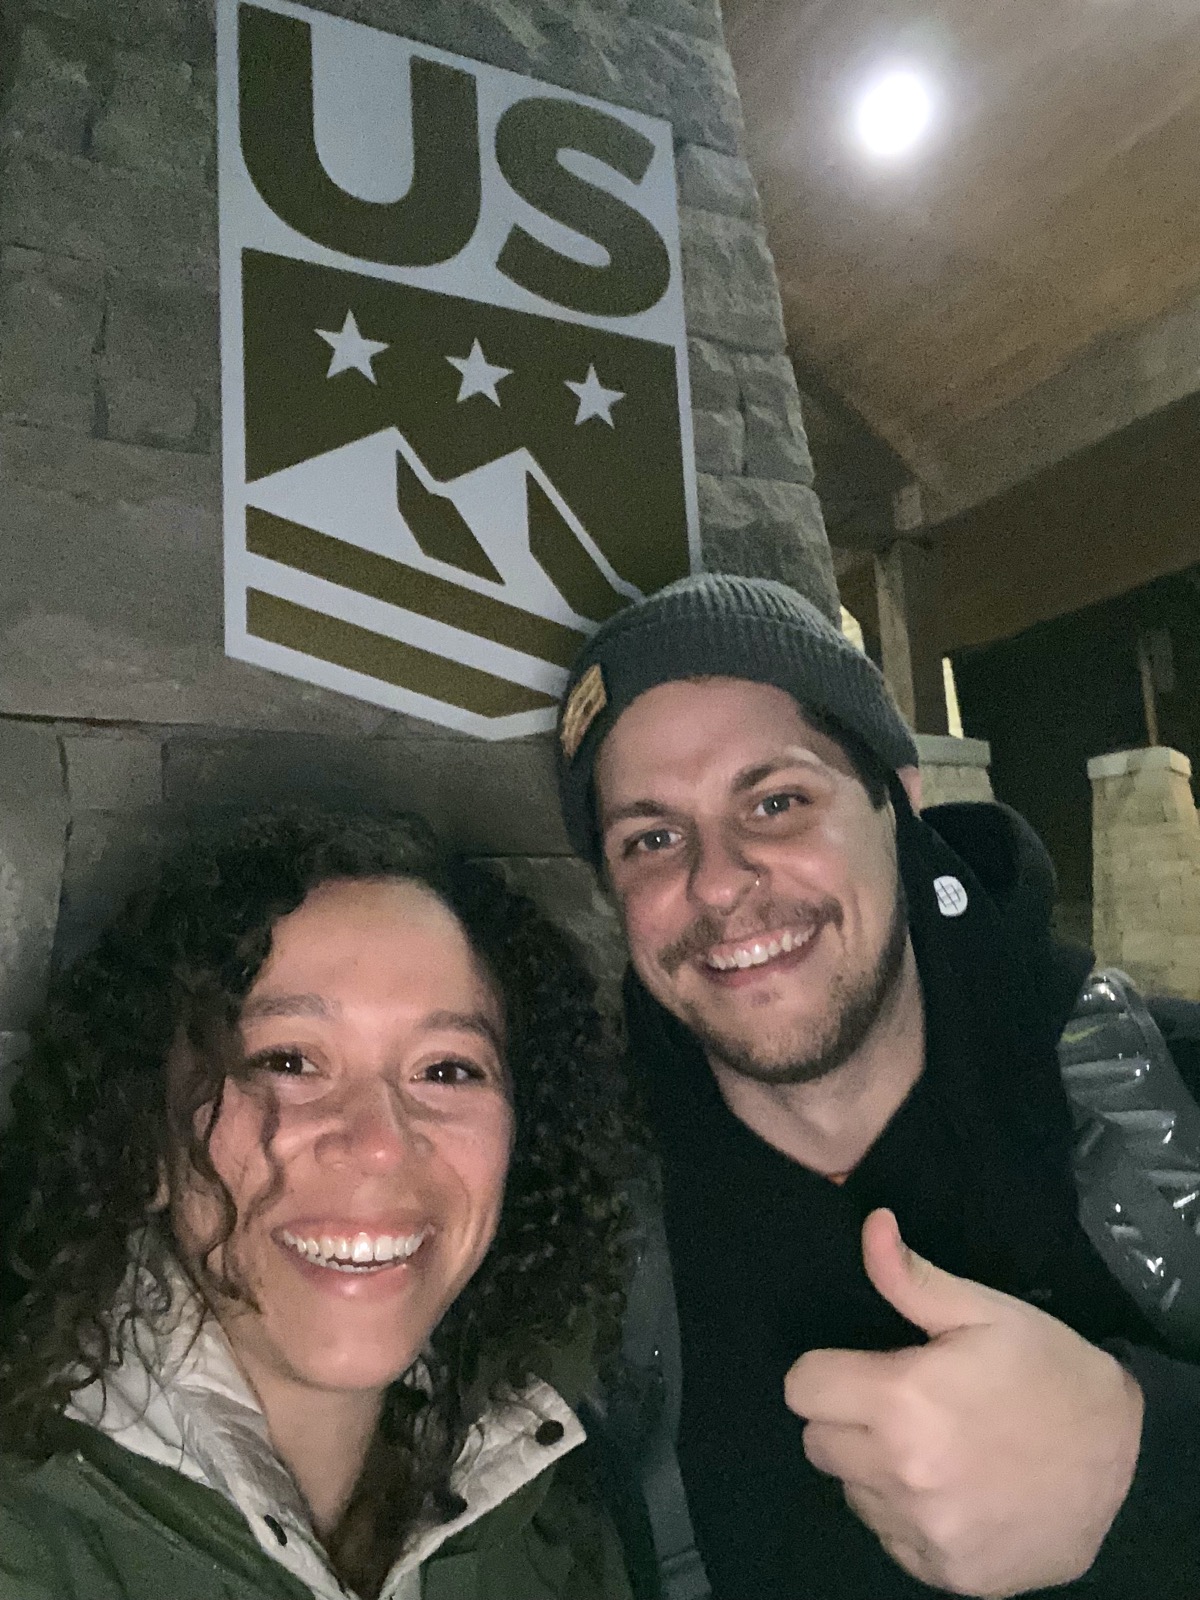 a white woman and white man posing for a selfie, smiling, the man giving a thumbs up. behind them on a wall is a u.s. ski team poster